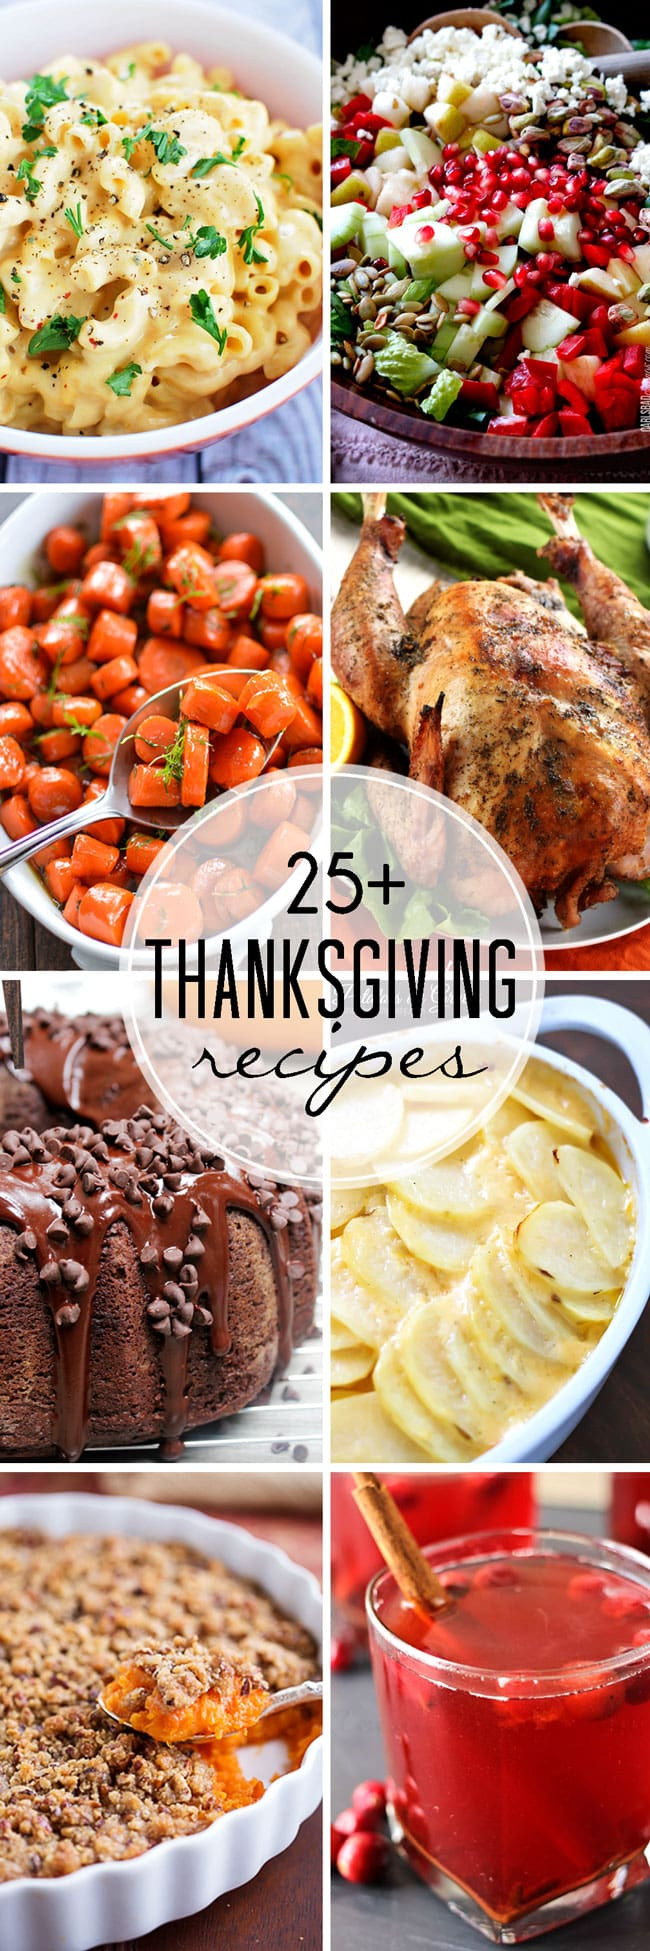 Thanksgiving Dinner Dishes
 25 Thanksgiving Recipes That Skinny Chick Can Bake